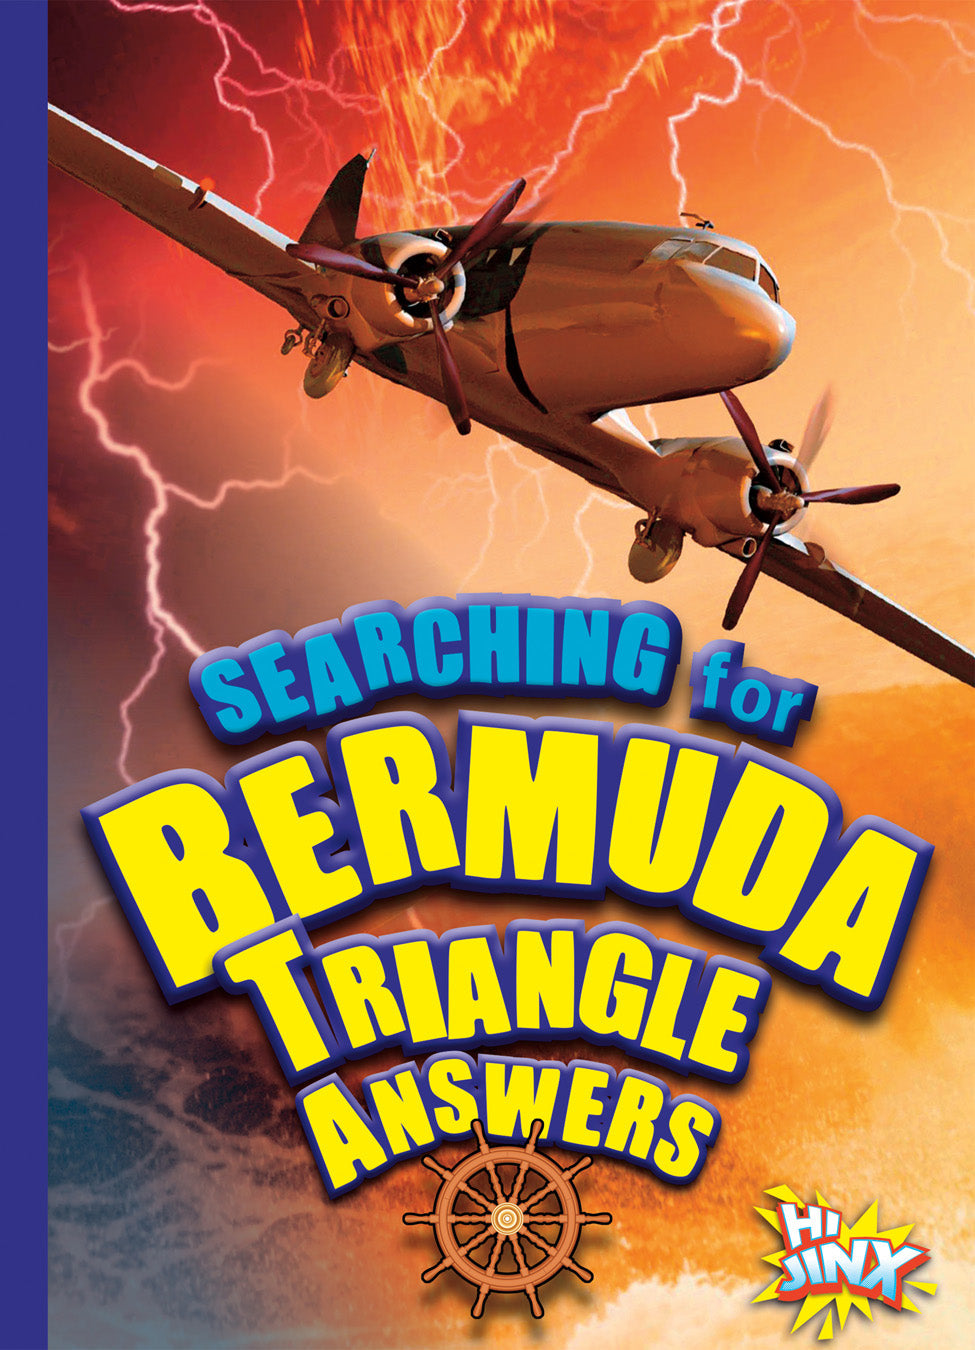 On the Paranormal Hunt: Searching for Bermuda Triangle Answers